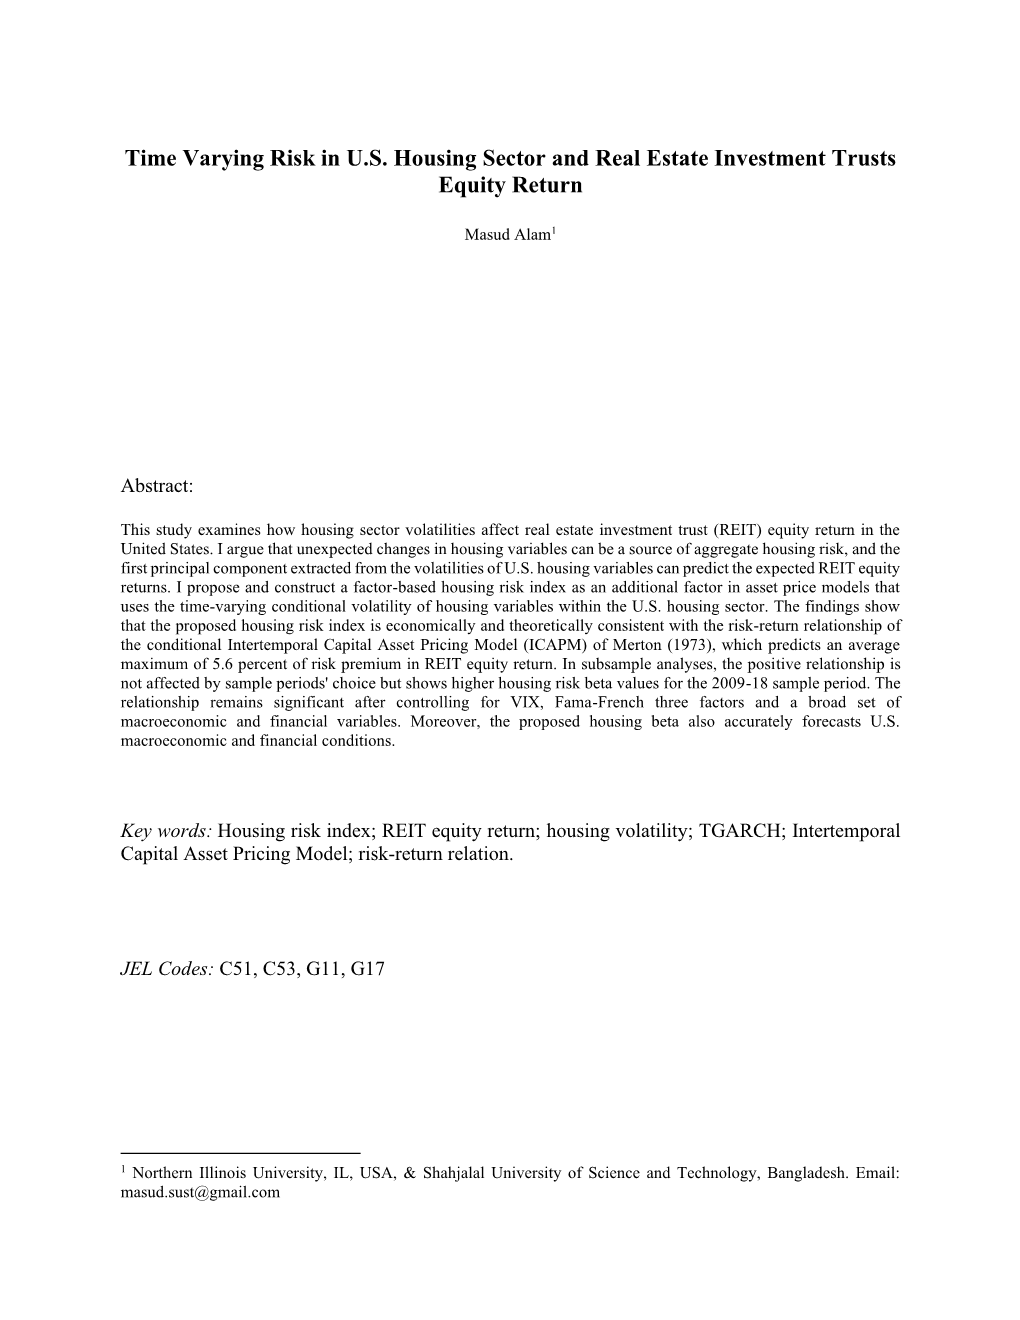 Time Varying Risk in U.S. Housing Sector and Real Estate Investment Trusts Equity Return